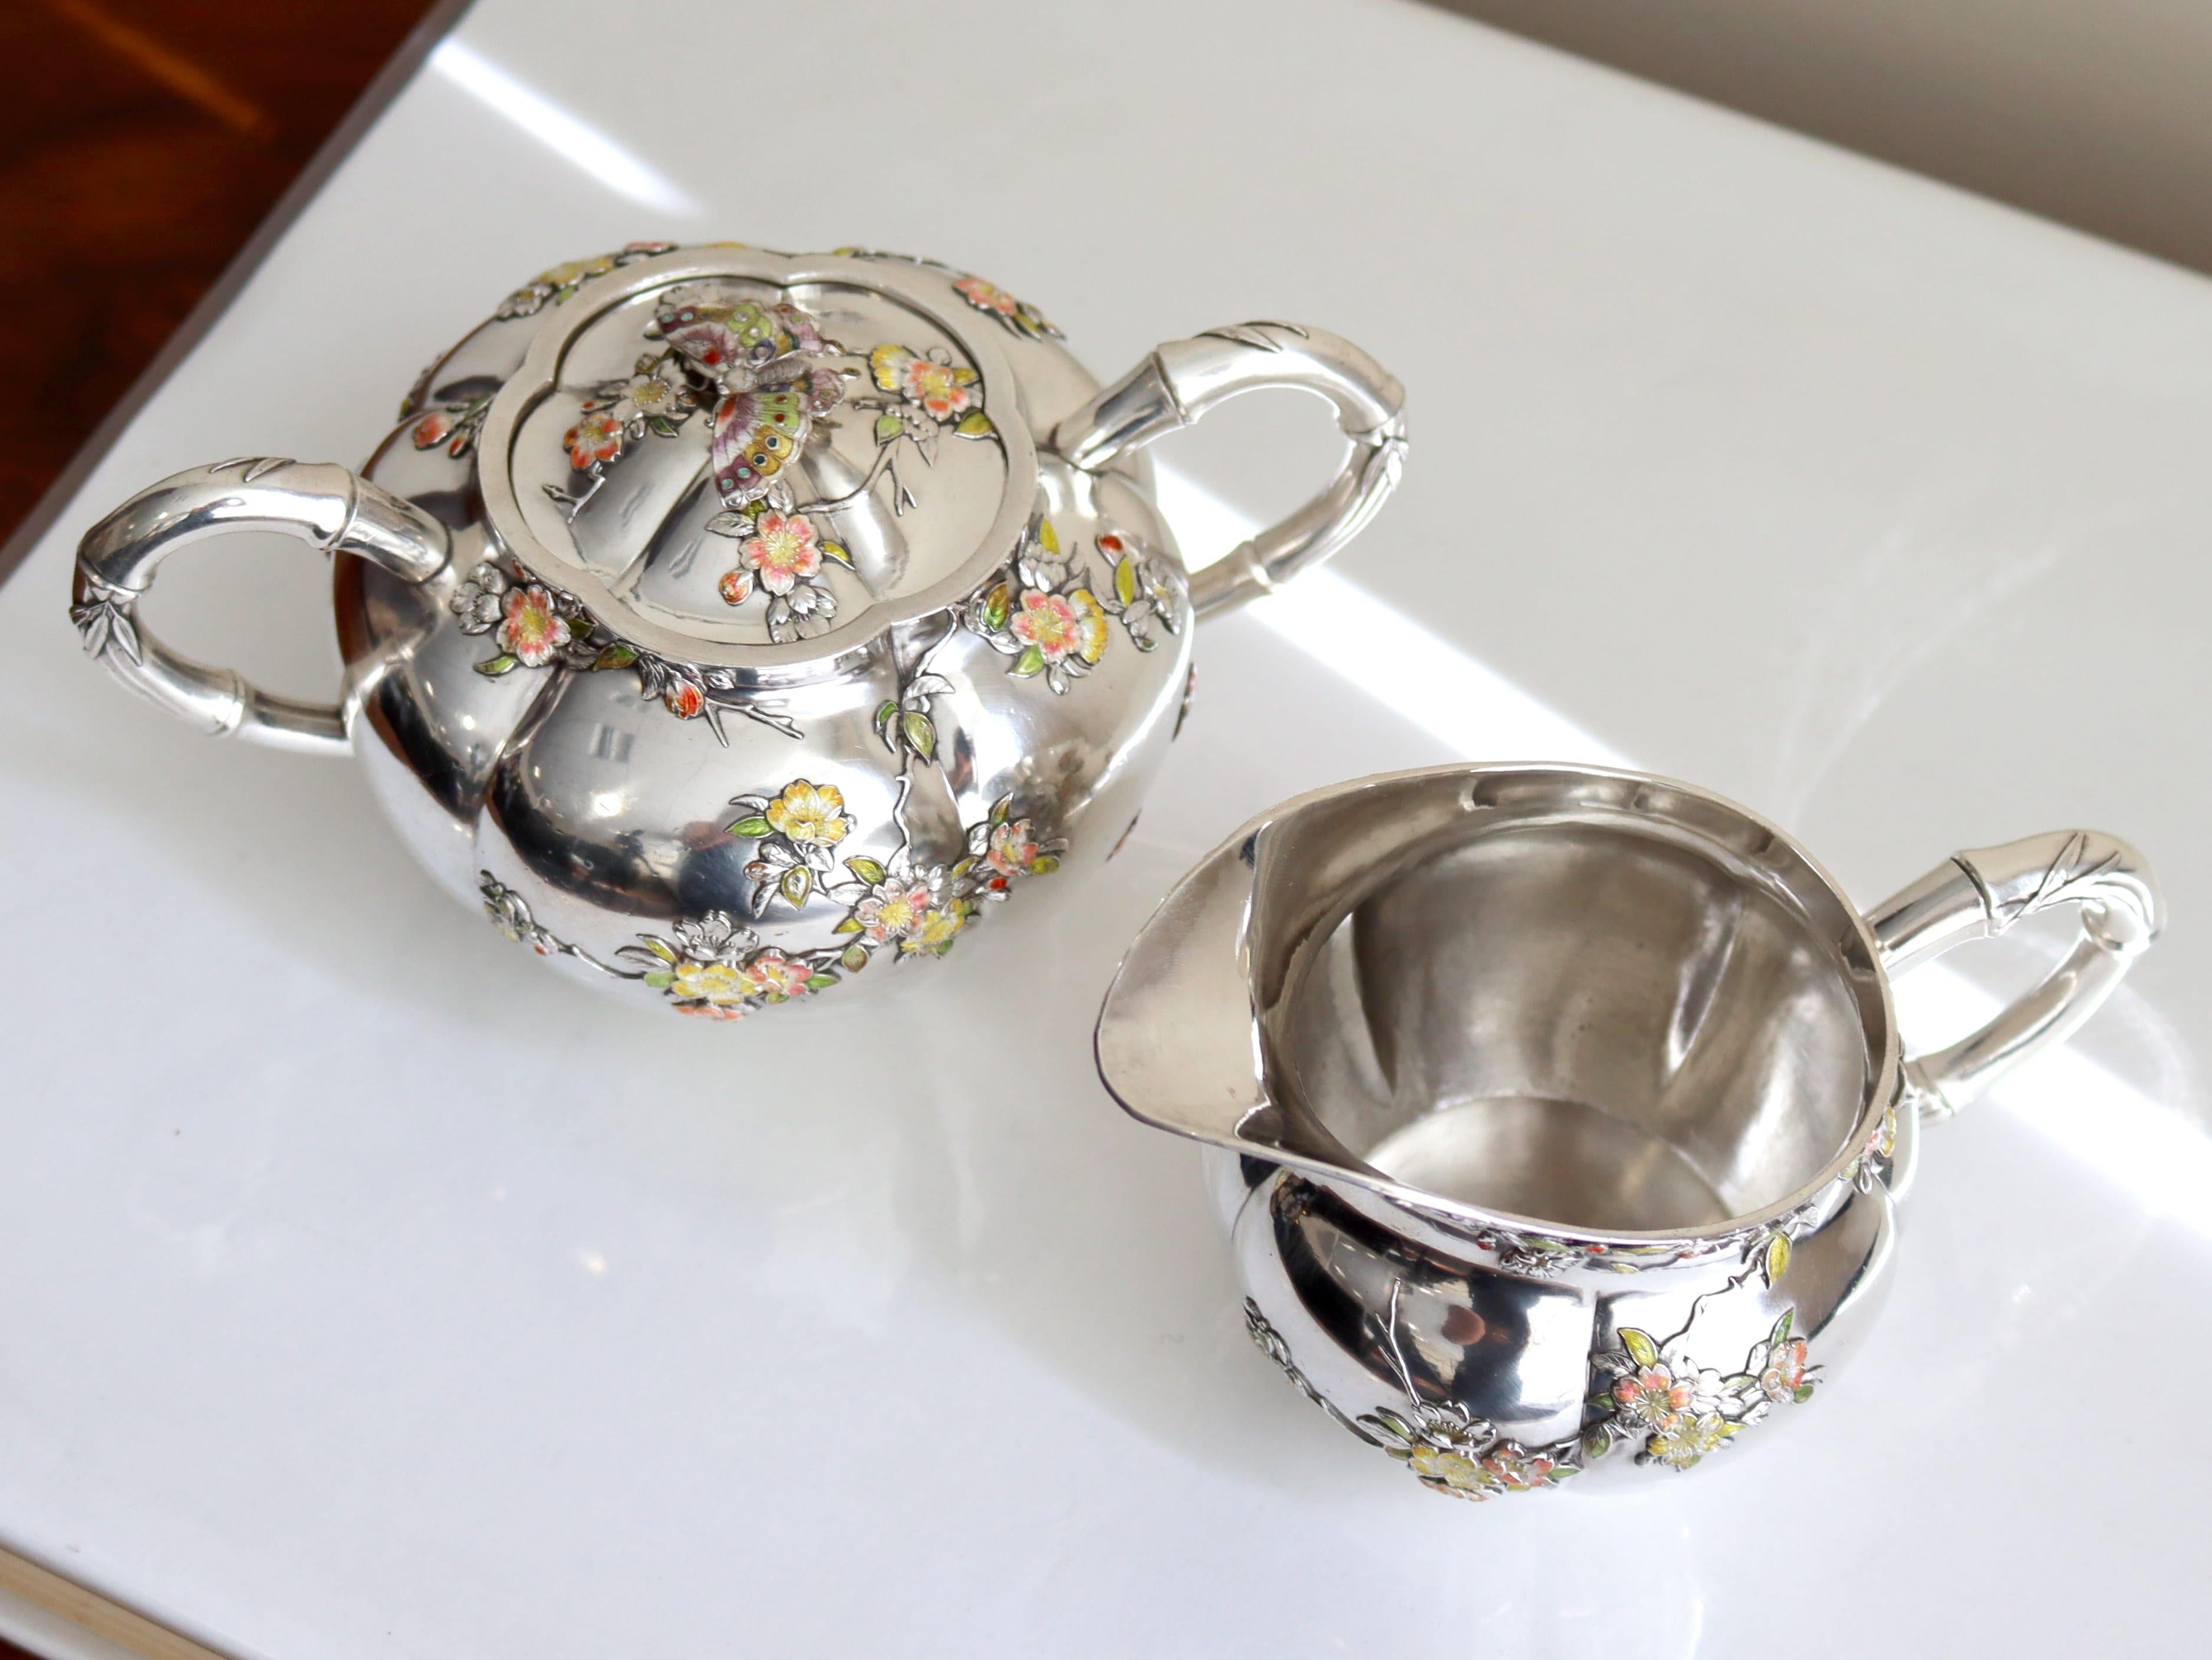 An exceptional, fine and impressive antique Japanese silver and enamel cream jug and sugar bowl set; part of our Japanese silverware collection.

This exceptional antique Japanese silver cream jug and covered sugar bowl have a circular